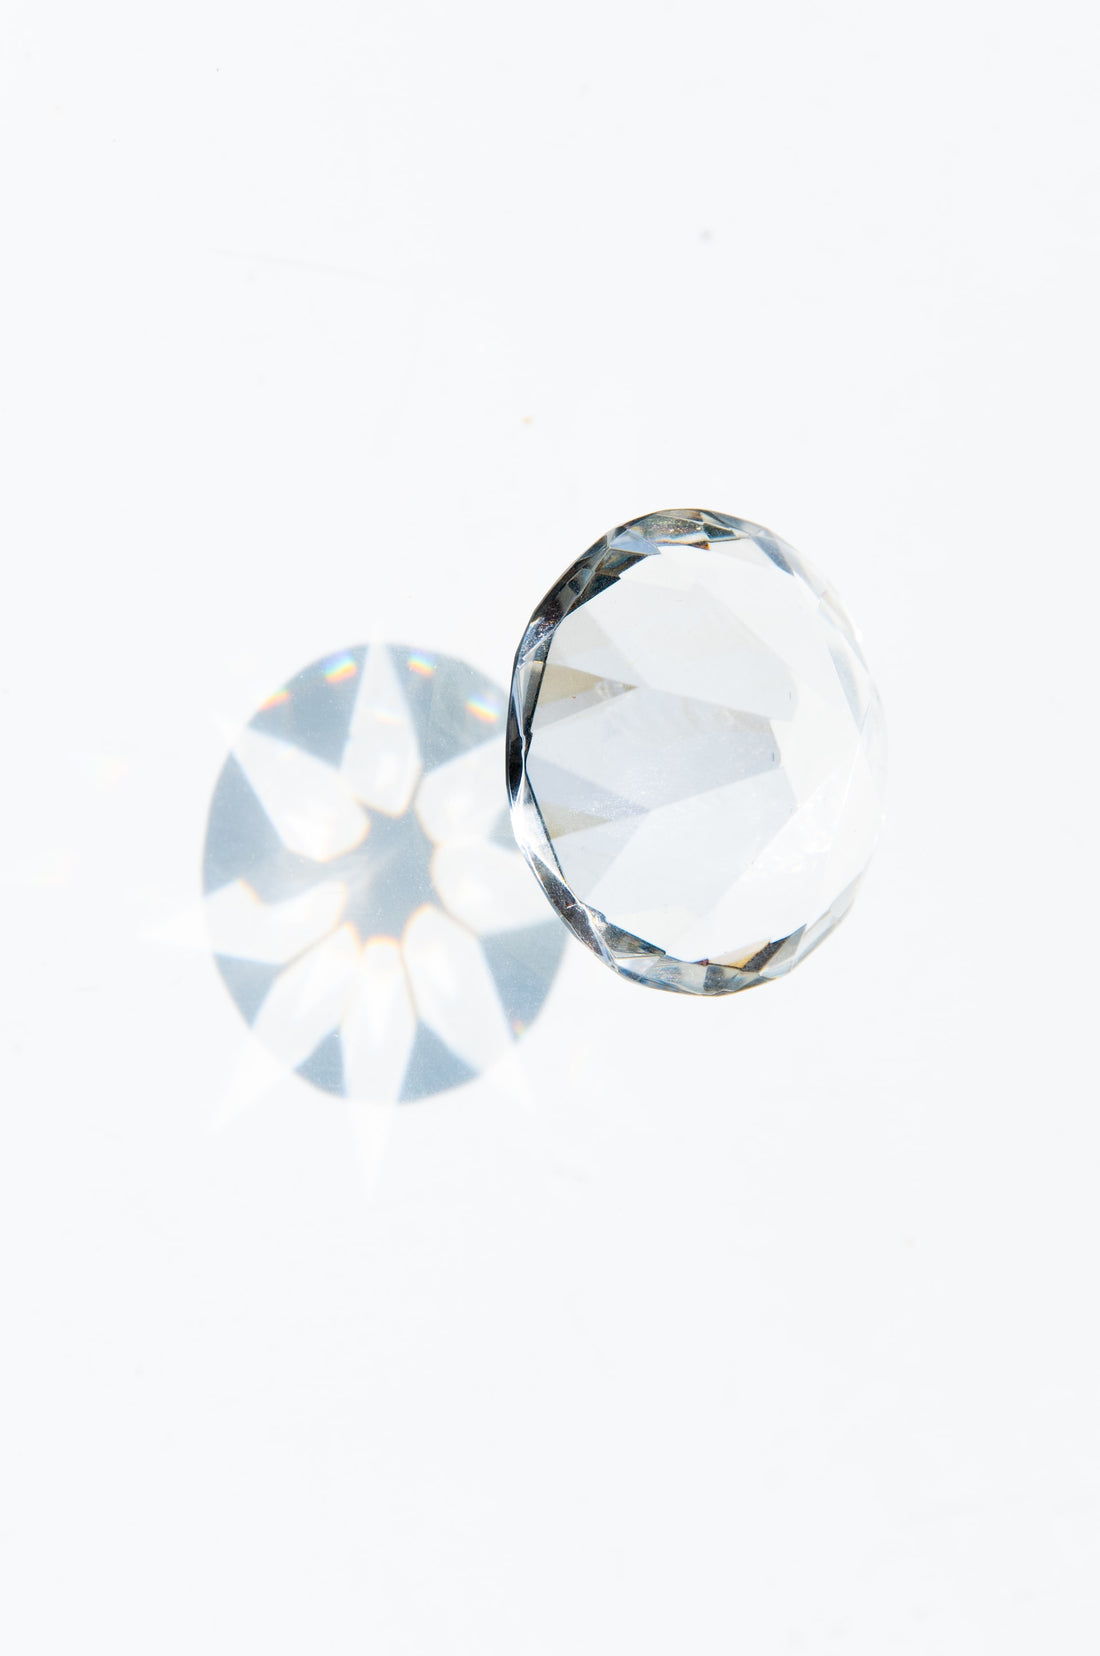 Here is the priceless art of Moissanite in Planderful